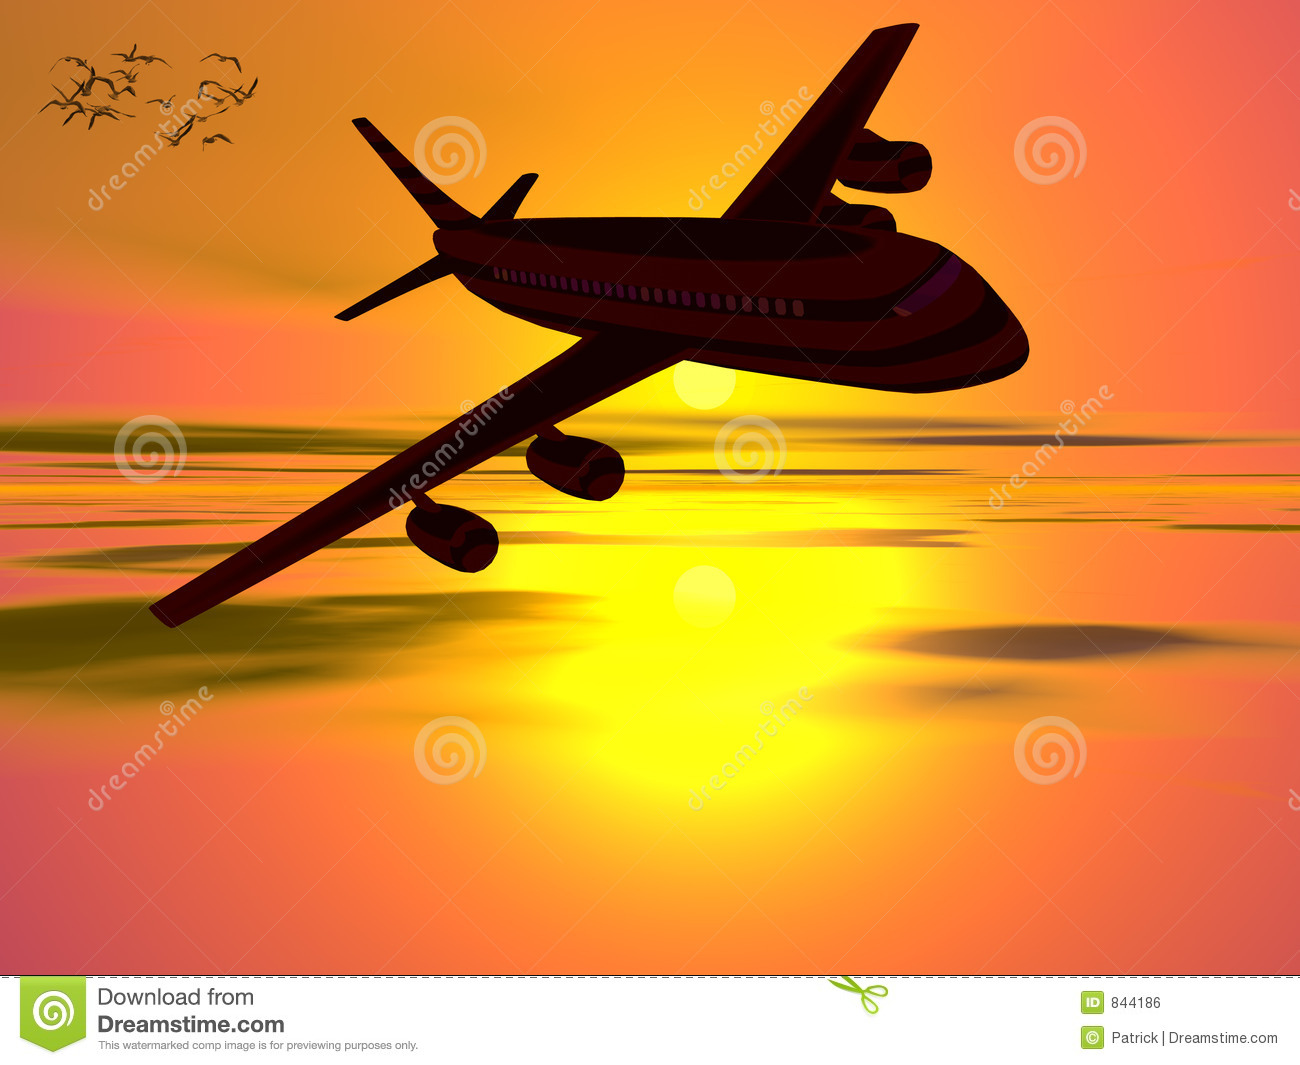 Airplane Going On Vacation  Royalty Free Stock Image   Image  844186